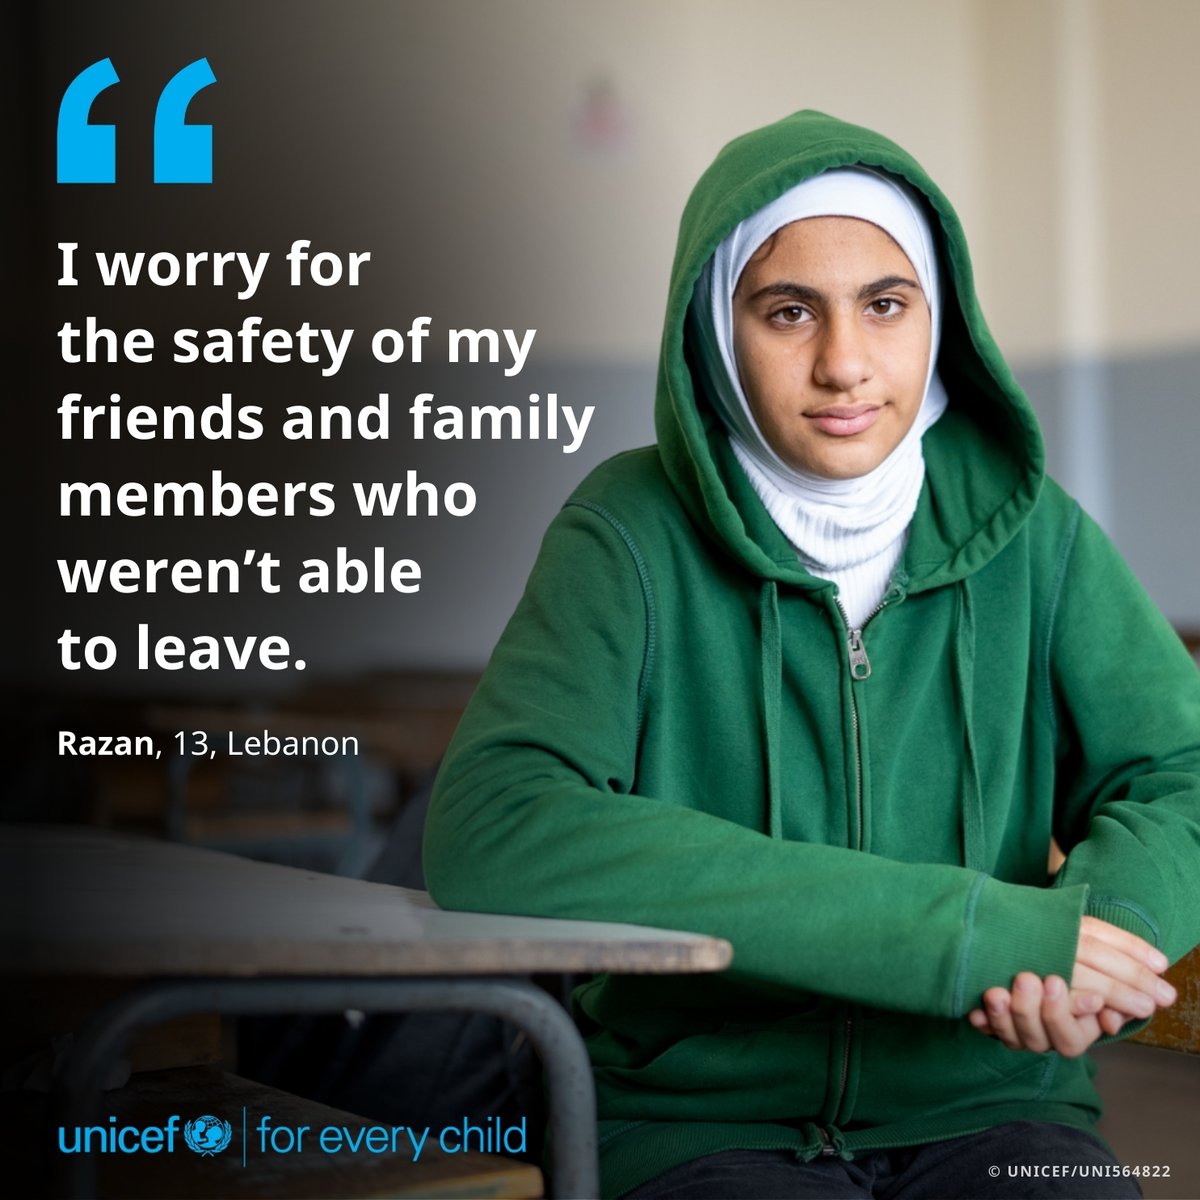 Ongoing conflict in the south of Lebanon are forcing children like Razan to flee their homes, disrupting their education and lives. UNICEF and partners are providing vital aid and emergency cash support to help children and families. What children really need is peace.